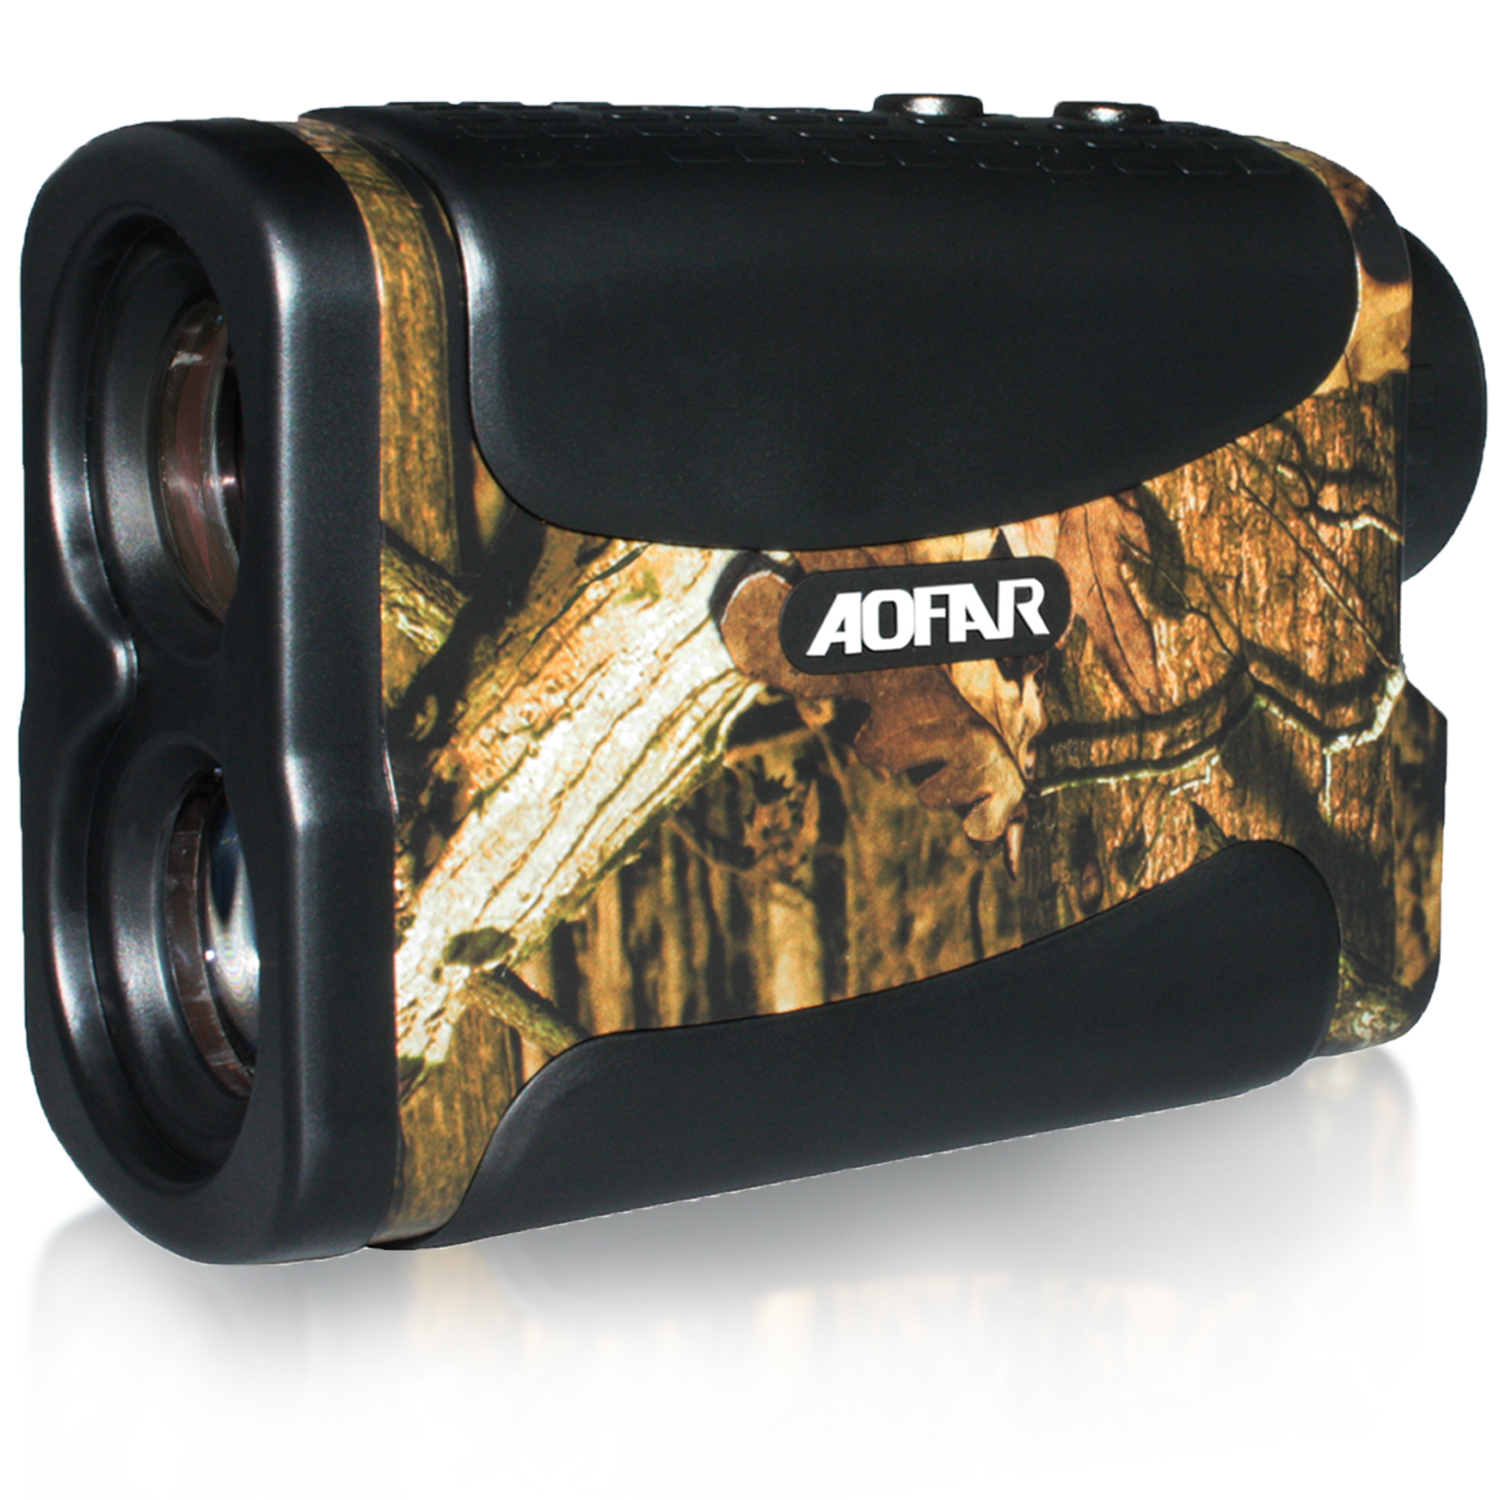 AOFAR Hunting Archery Range Finder HX-700N 700 Yards Waterproof Rangefinder for Bow Hunting with Range Scan Fog and Speed Mode, Free Battery, Carrying Case - image 1 of 6